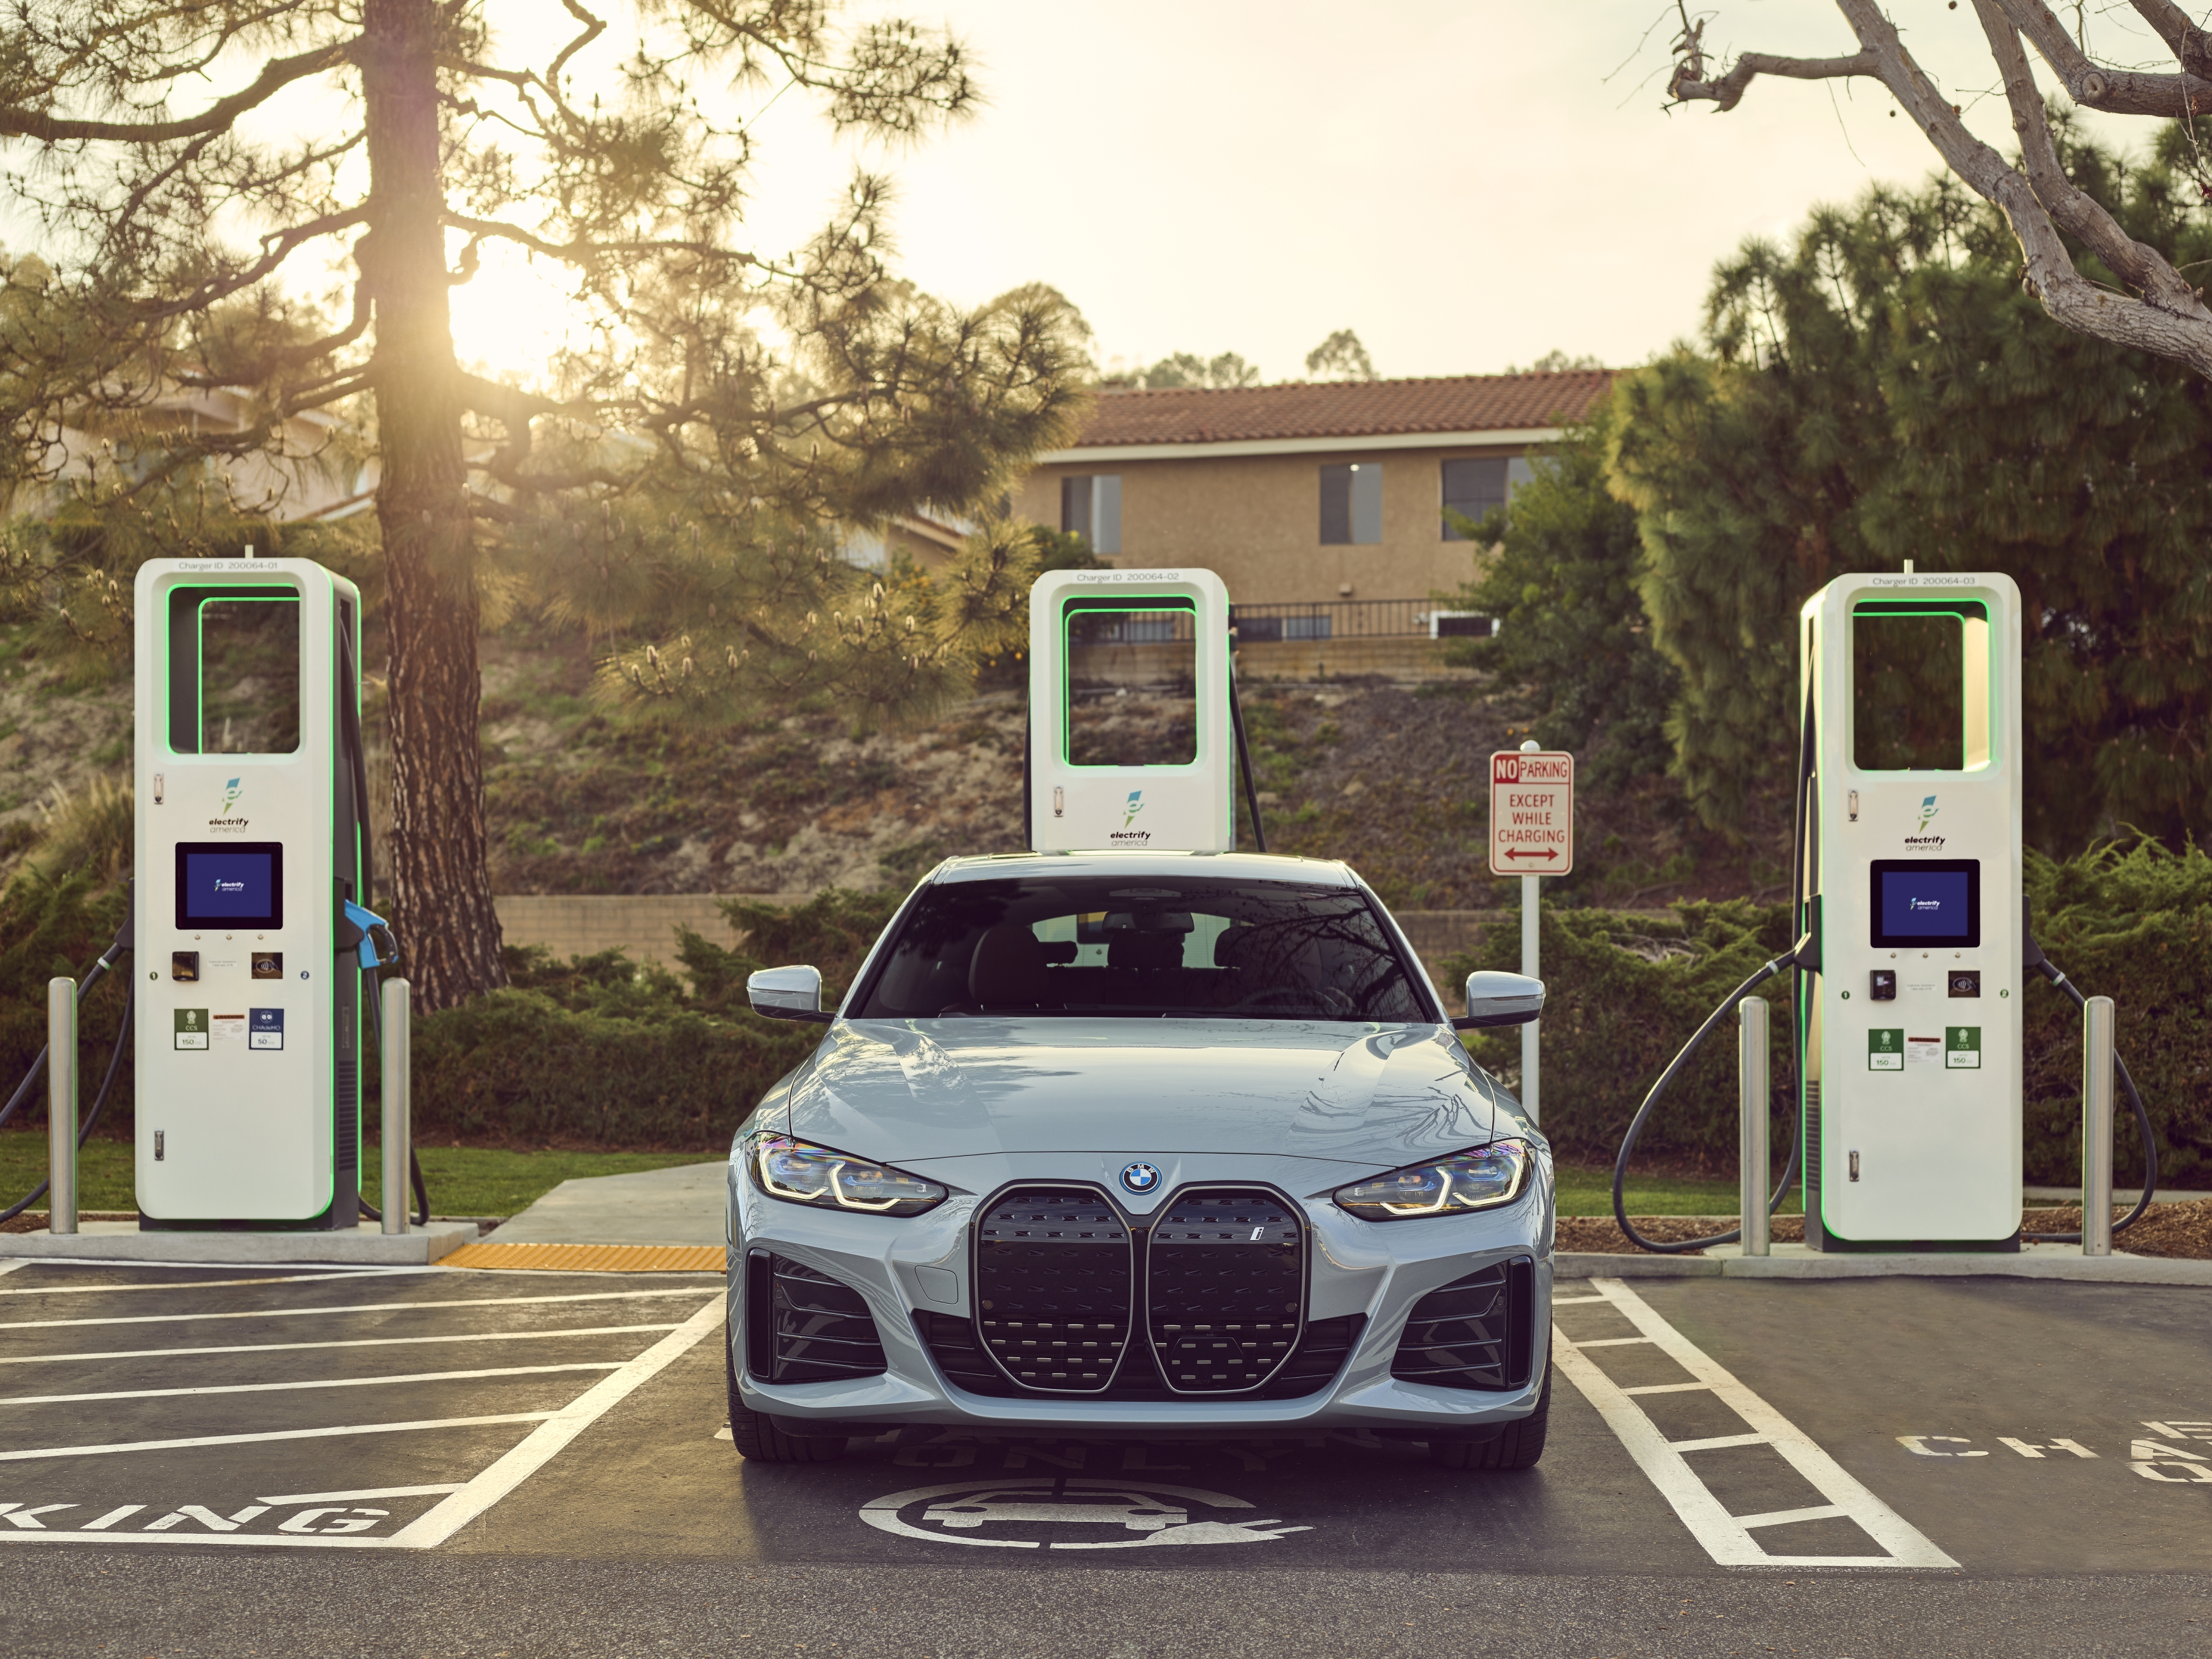 BMW Partners with Electrify America; Offers Two Years of Complimentary Charging for BMW EV’s